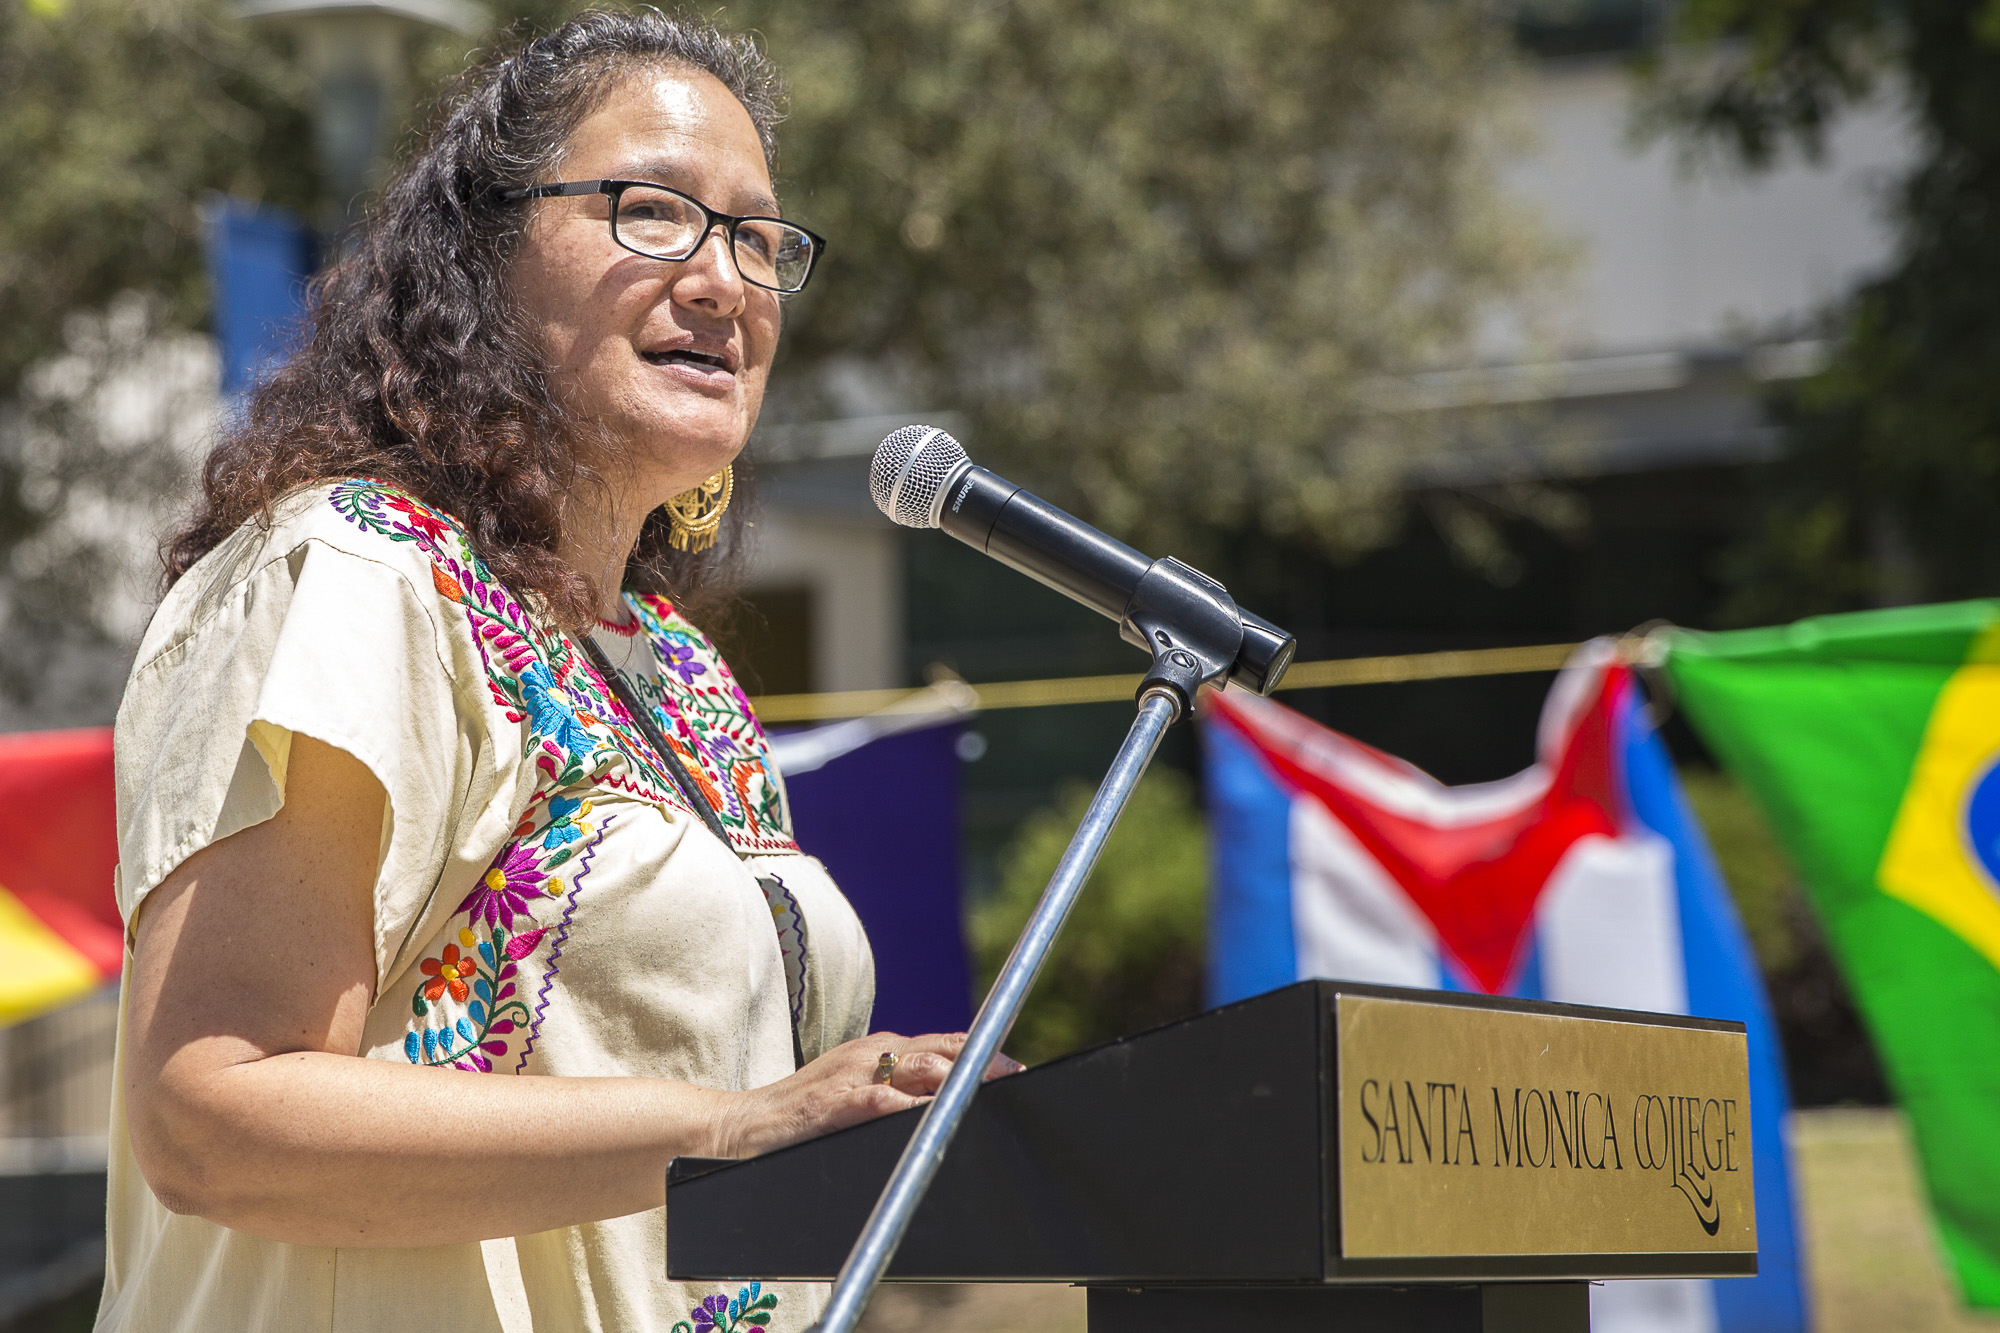  Santa Monica College (SMC) “Adelante” club advisor and Cinco de Mayo celebration event organizer Maria Martinez speaks to the students and faculty in attendance before the Cinco De Mayo celebration festivities begins in front of the clock tower on t